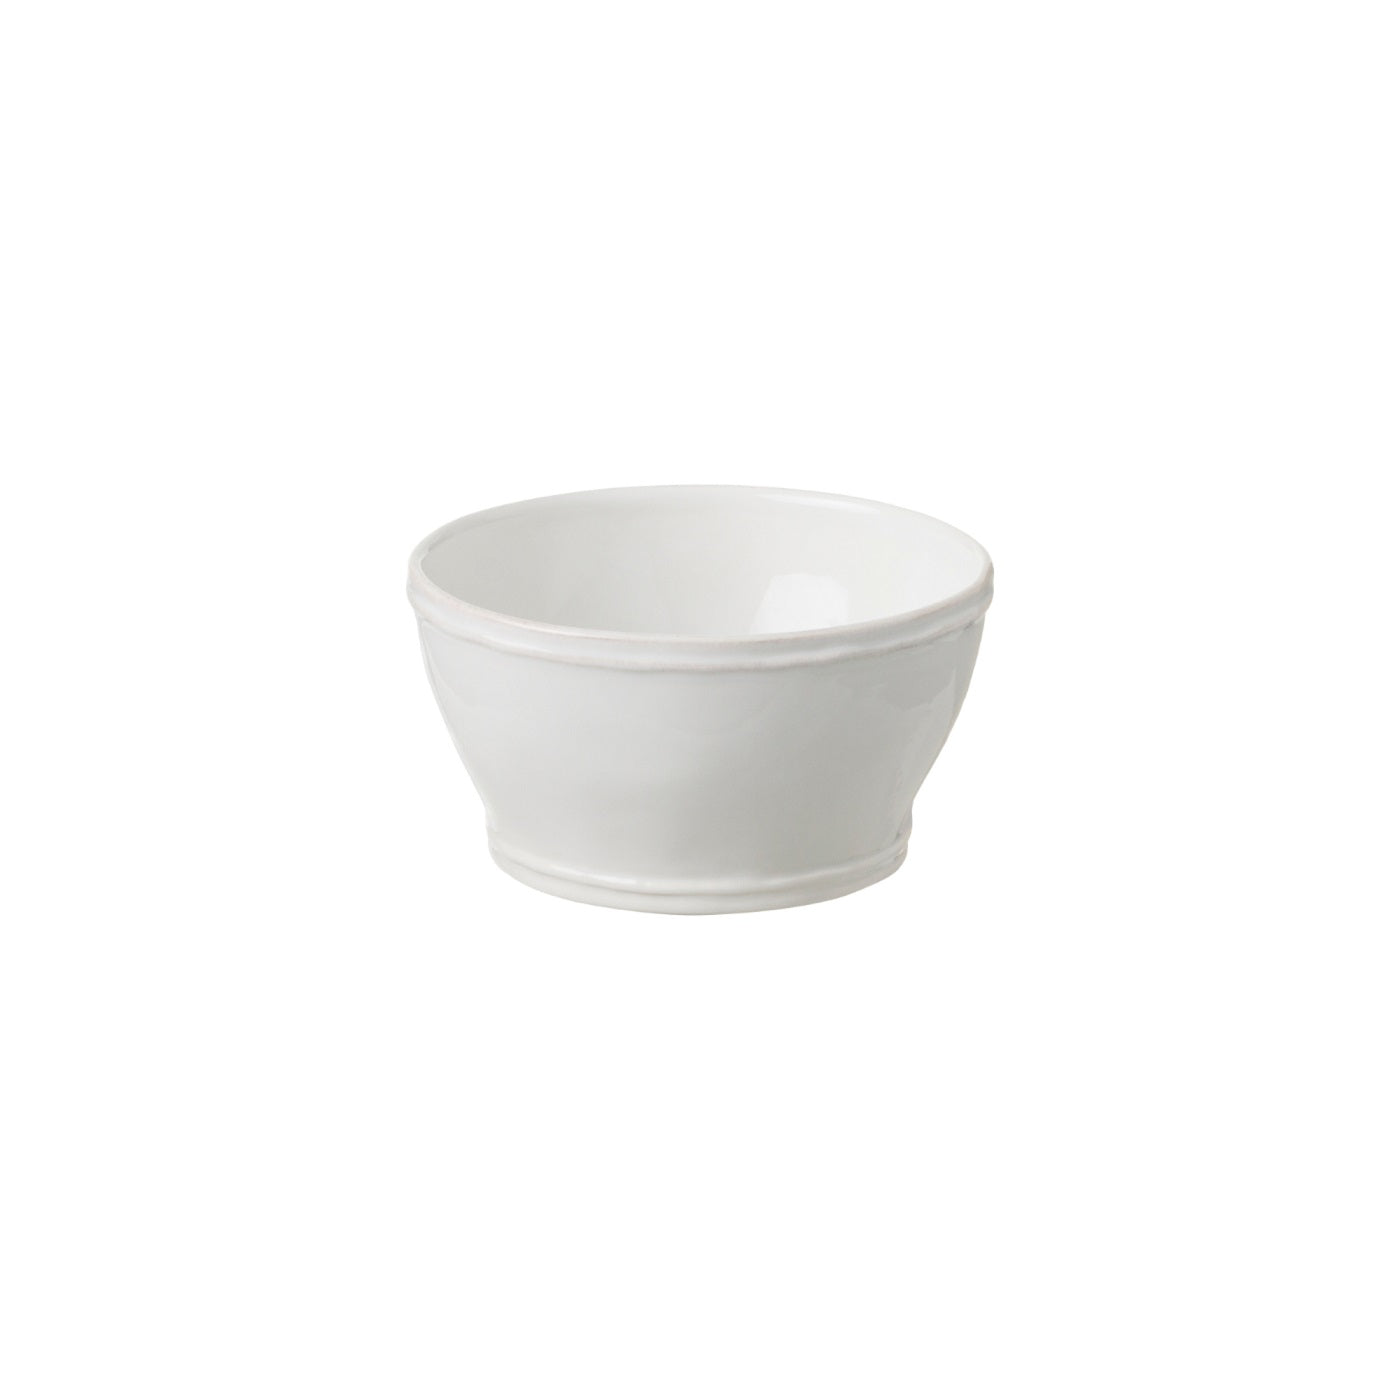 Pearly white cereal bowl with raised border on top and bottom.